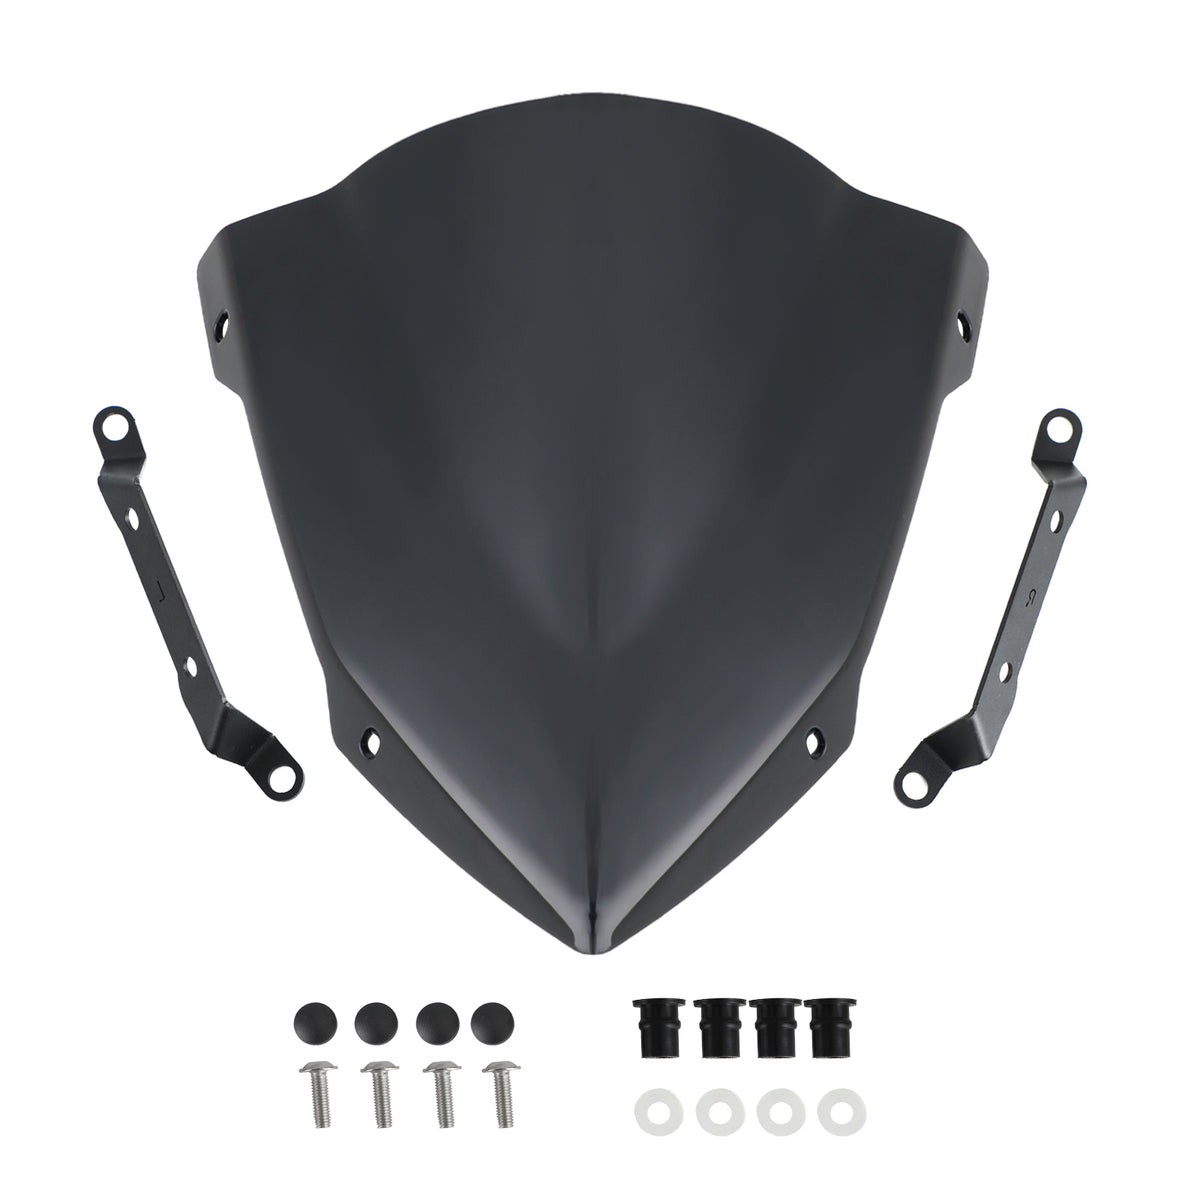 Windscreen Windshield Shield Protector fit for Yamaha MT-09 2014-2016 Generic